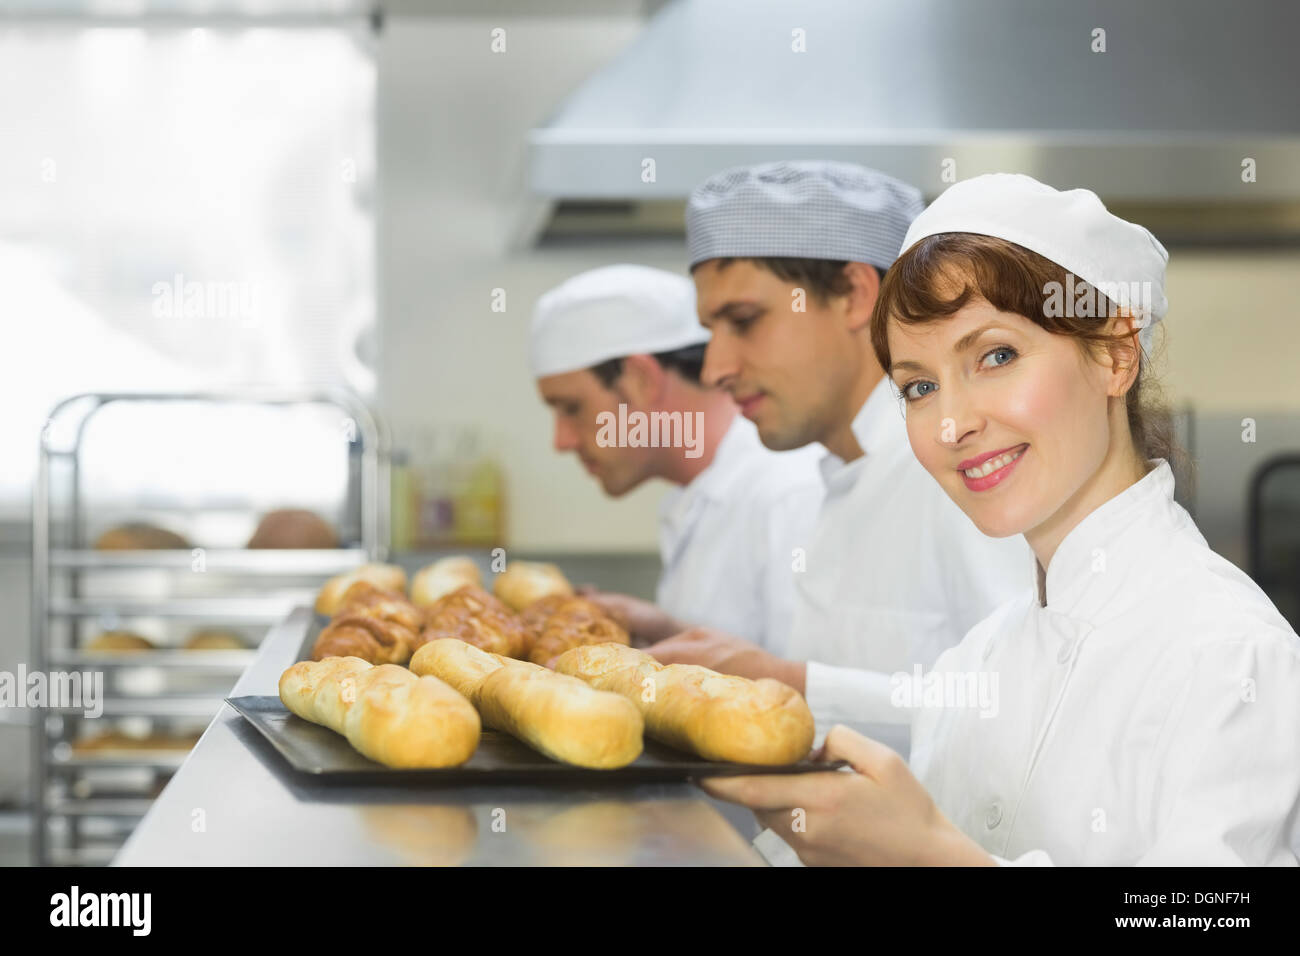 Happy female baker smiling at the camera Banque D'Images